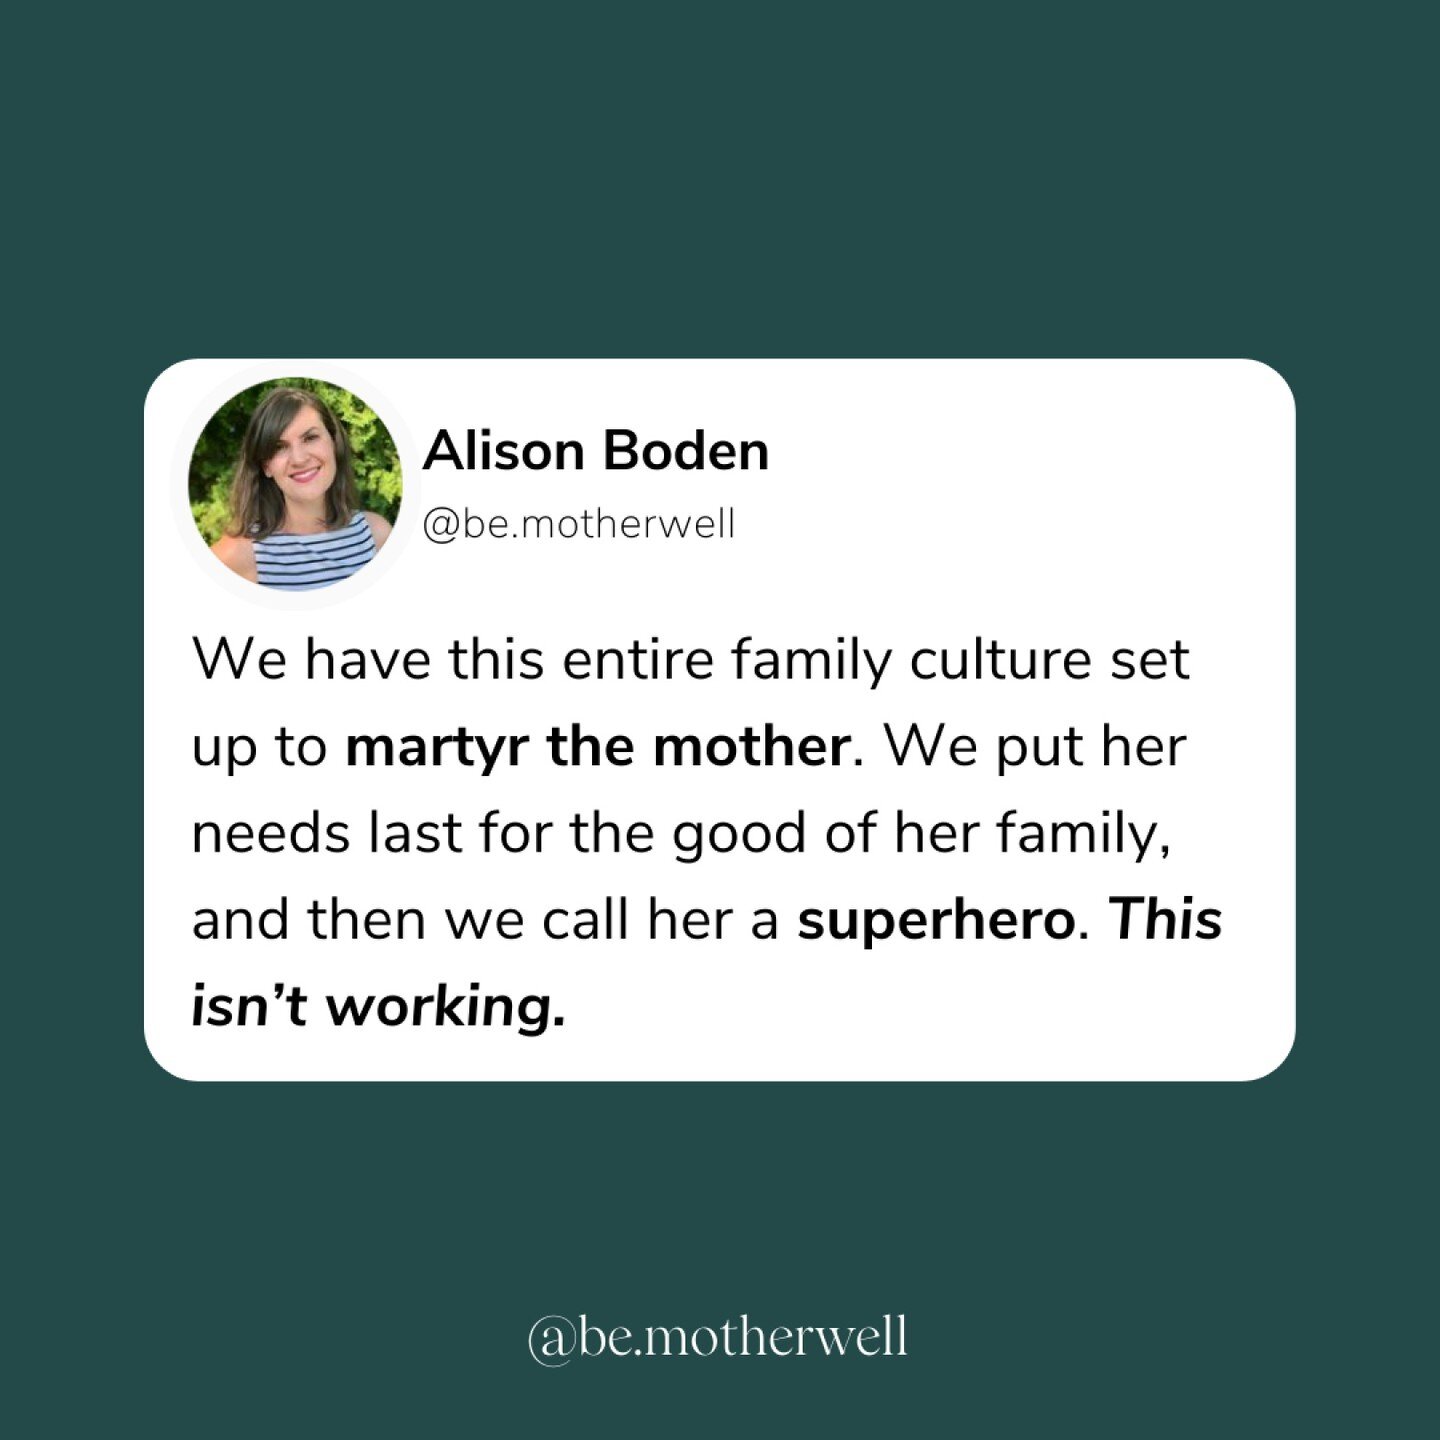 We've created a family vibe where Mom becomes the unsung hero, always putting her needs on the back burner. But hey, let's face it, turning Mom into a superhero 24/7? NOT SUSTAINABLE. 

Here's what I know: 

A prioritized mom = less overwhelm. 

I kn